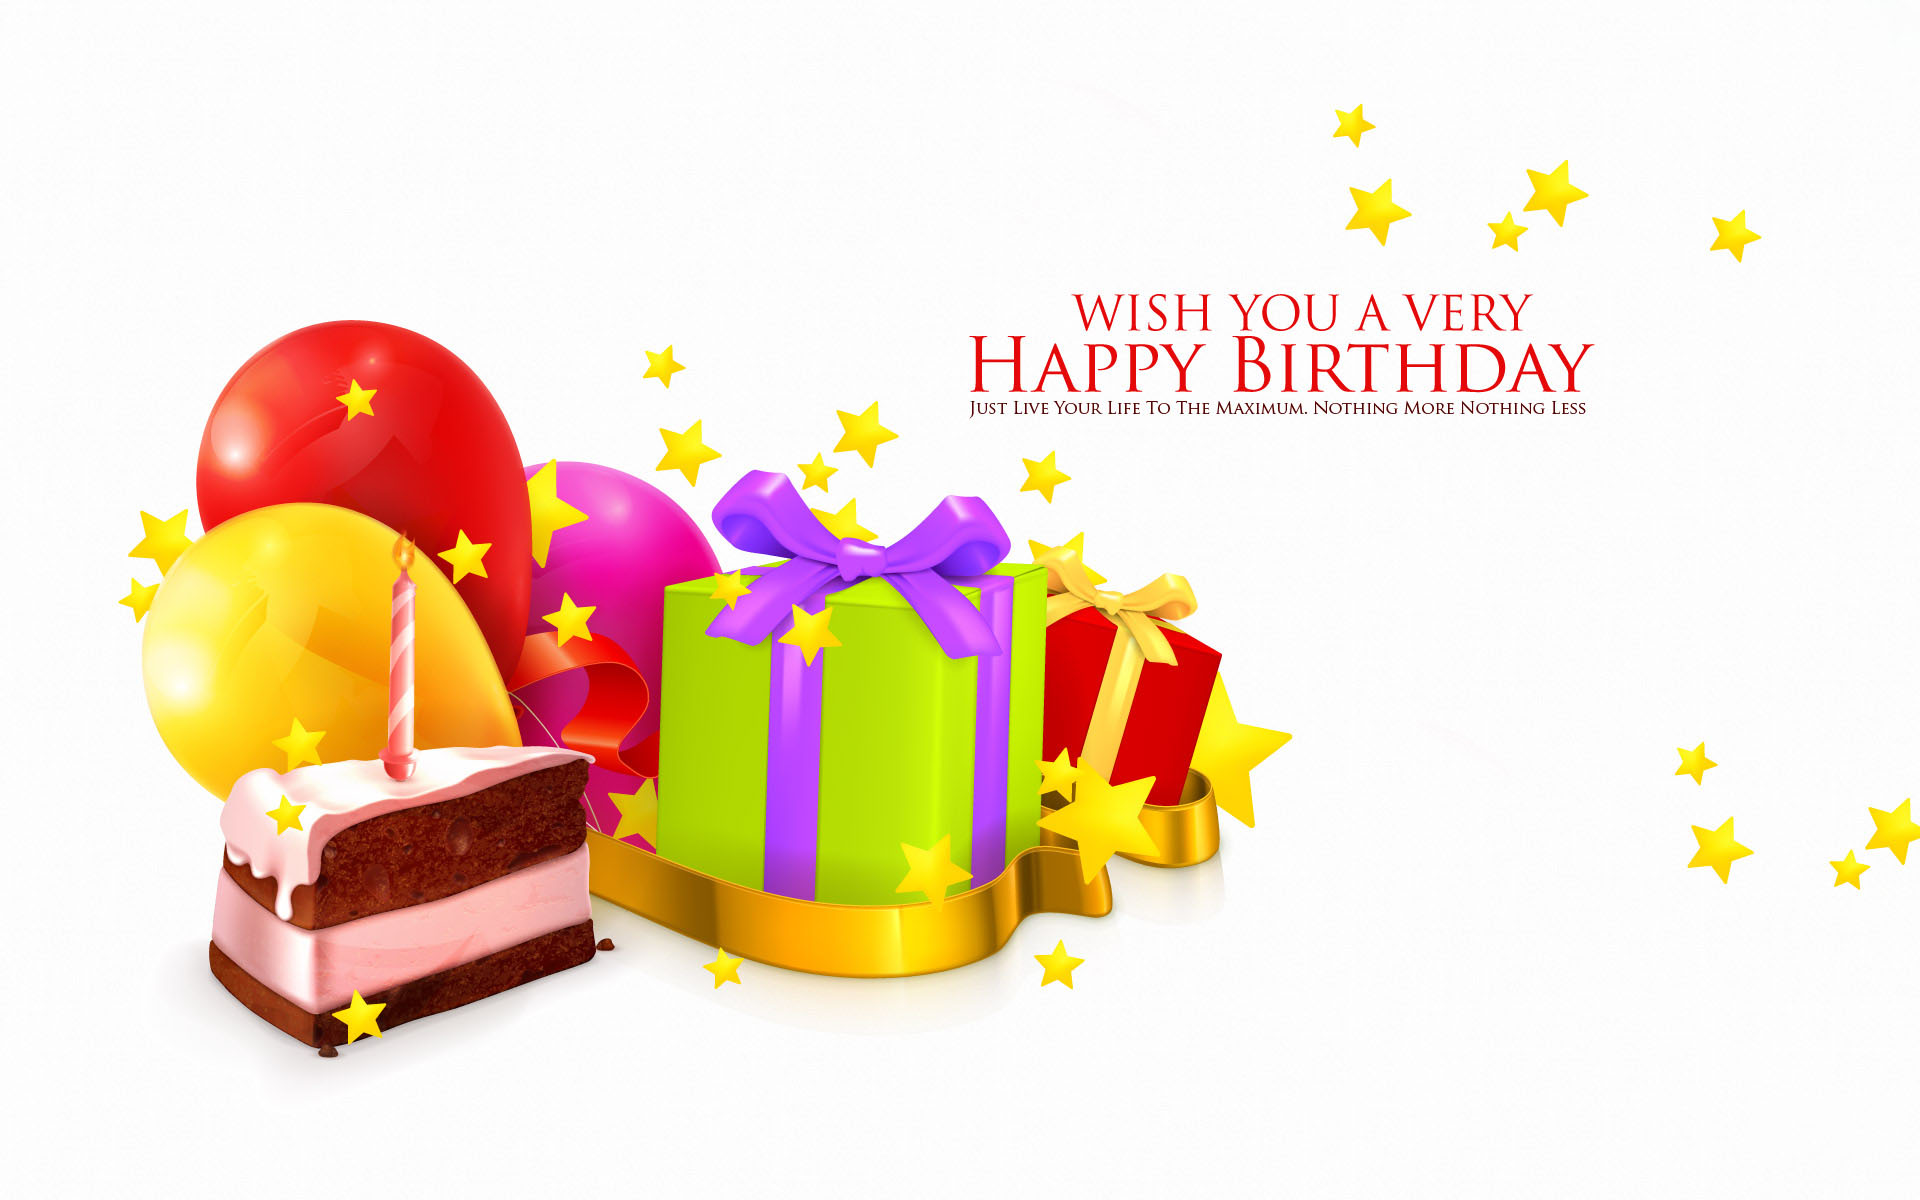 Happy Birthday Wallpapers HD Pictures One HD Wallpaper Pictures 1920x1200